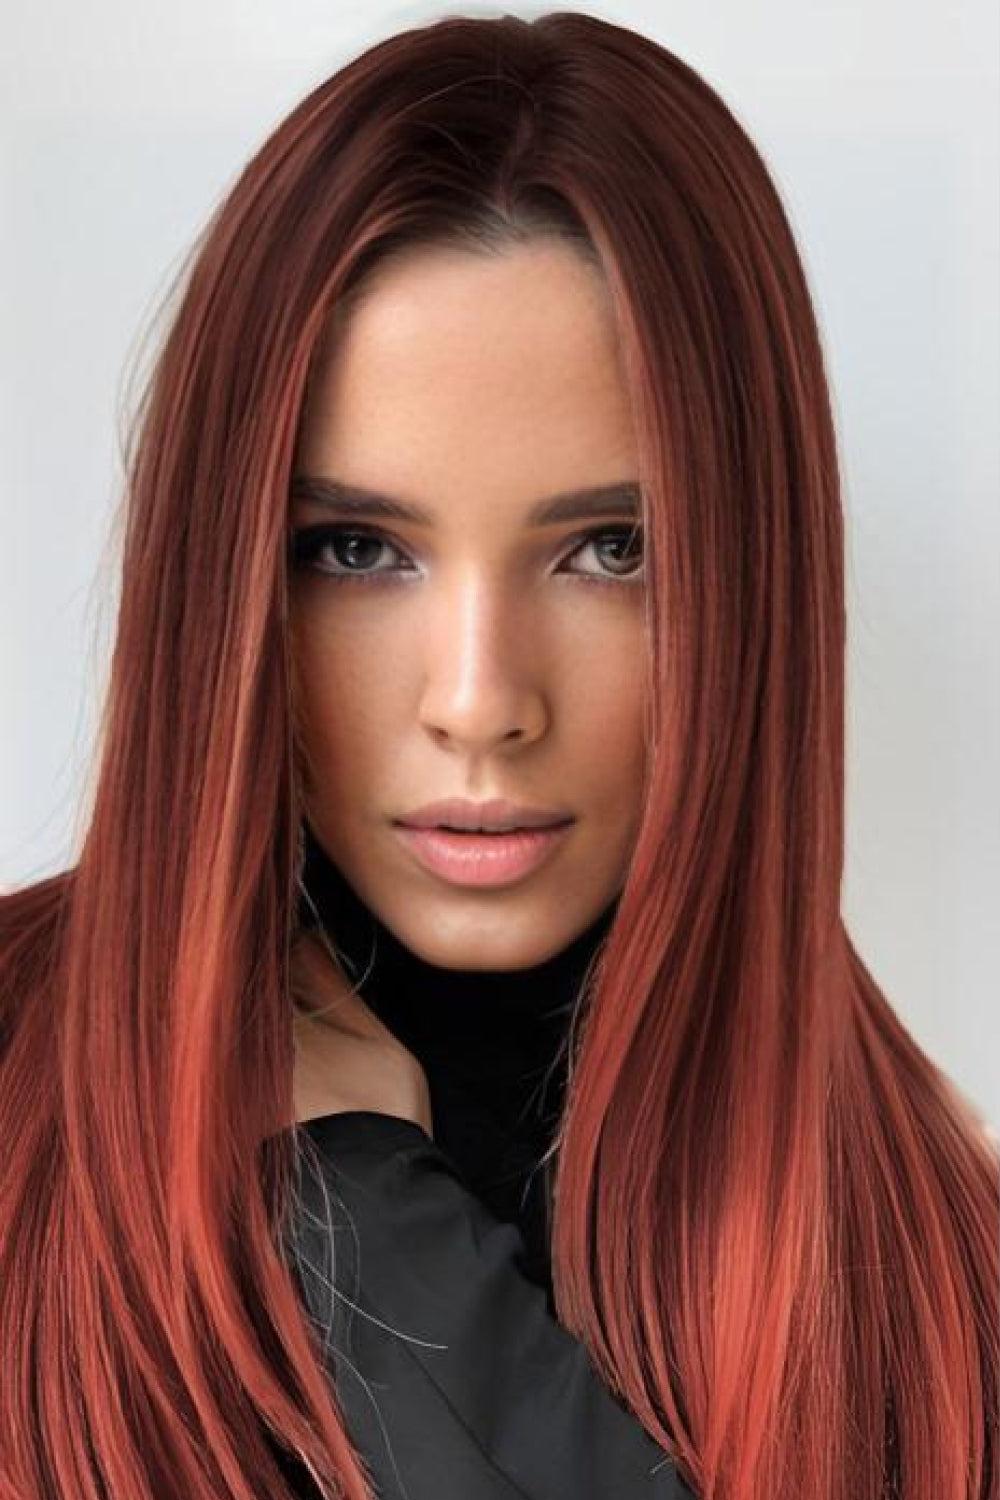 13x2" Full-Machine Wigs Synthetic Mid-Length Straight 27"